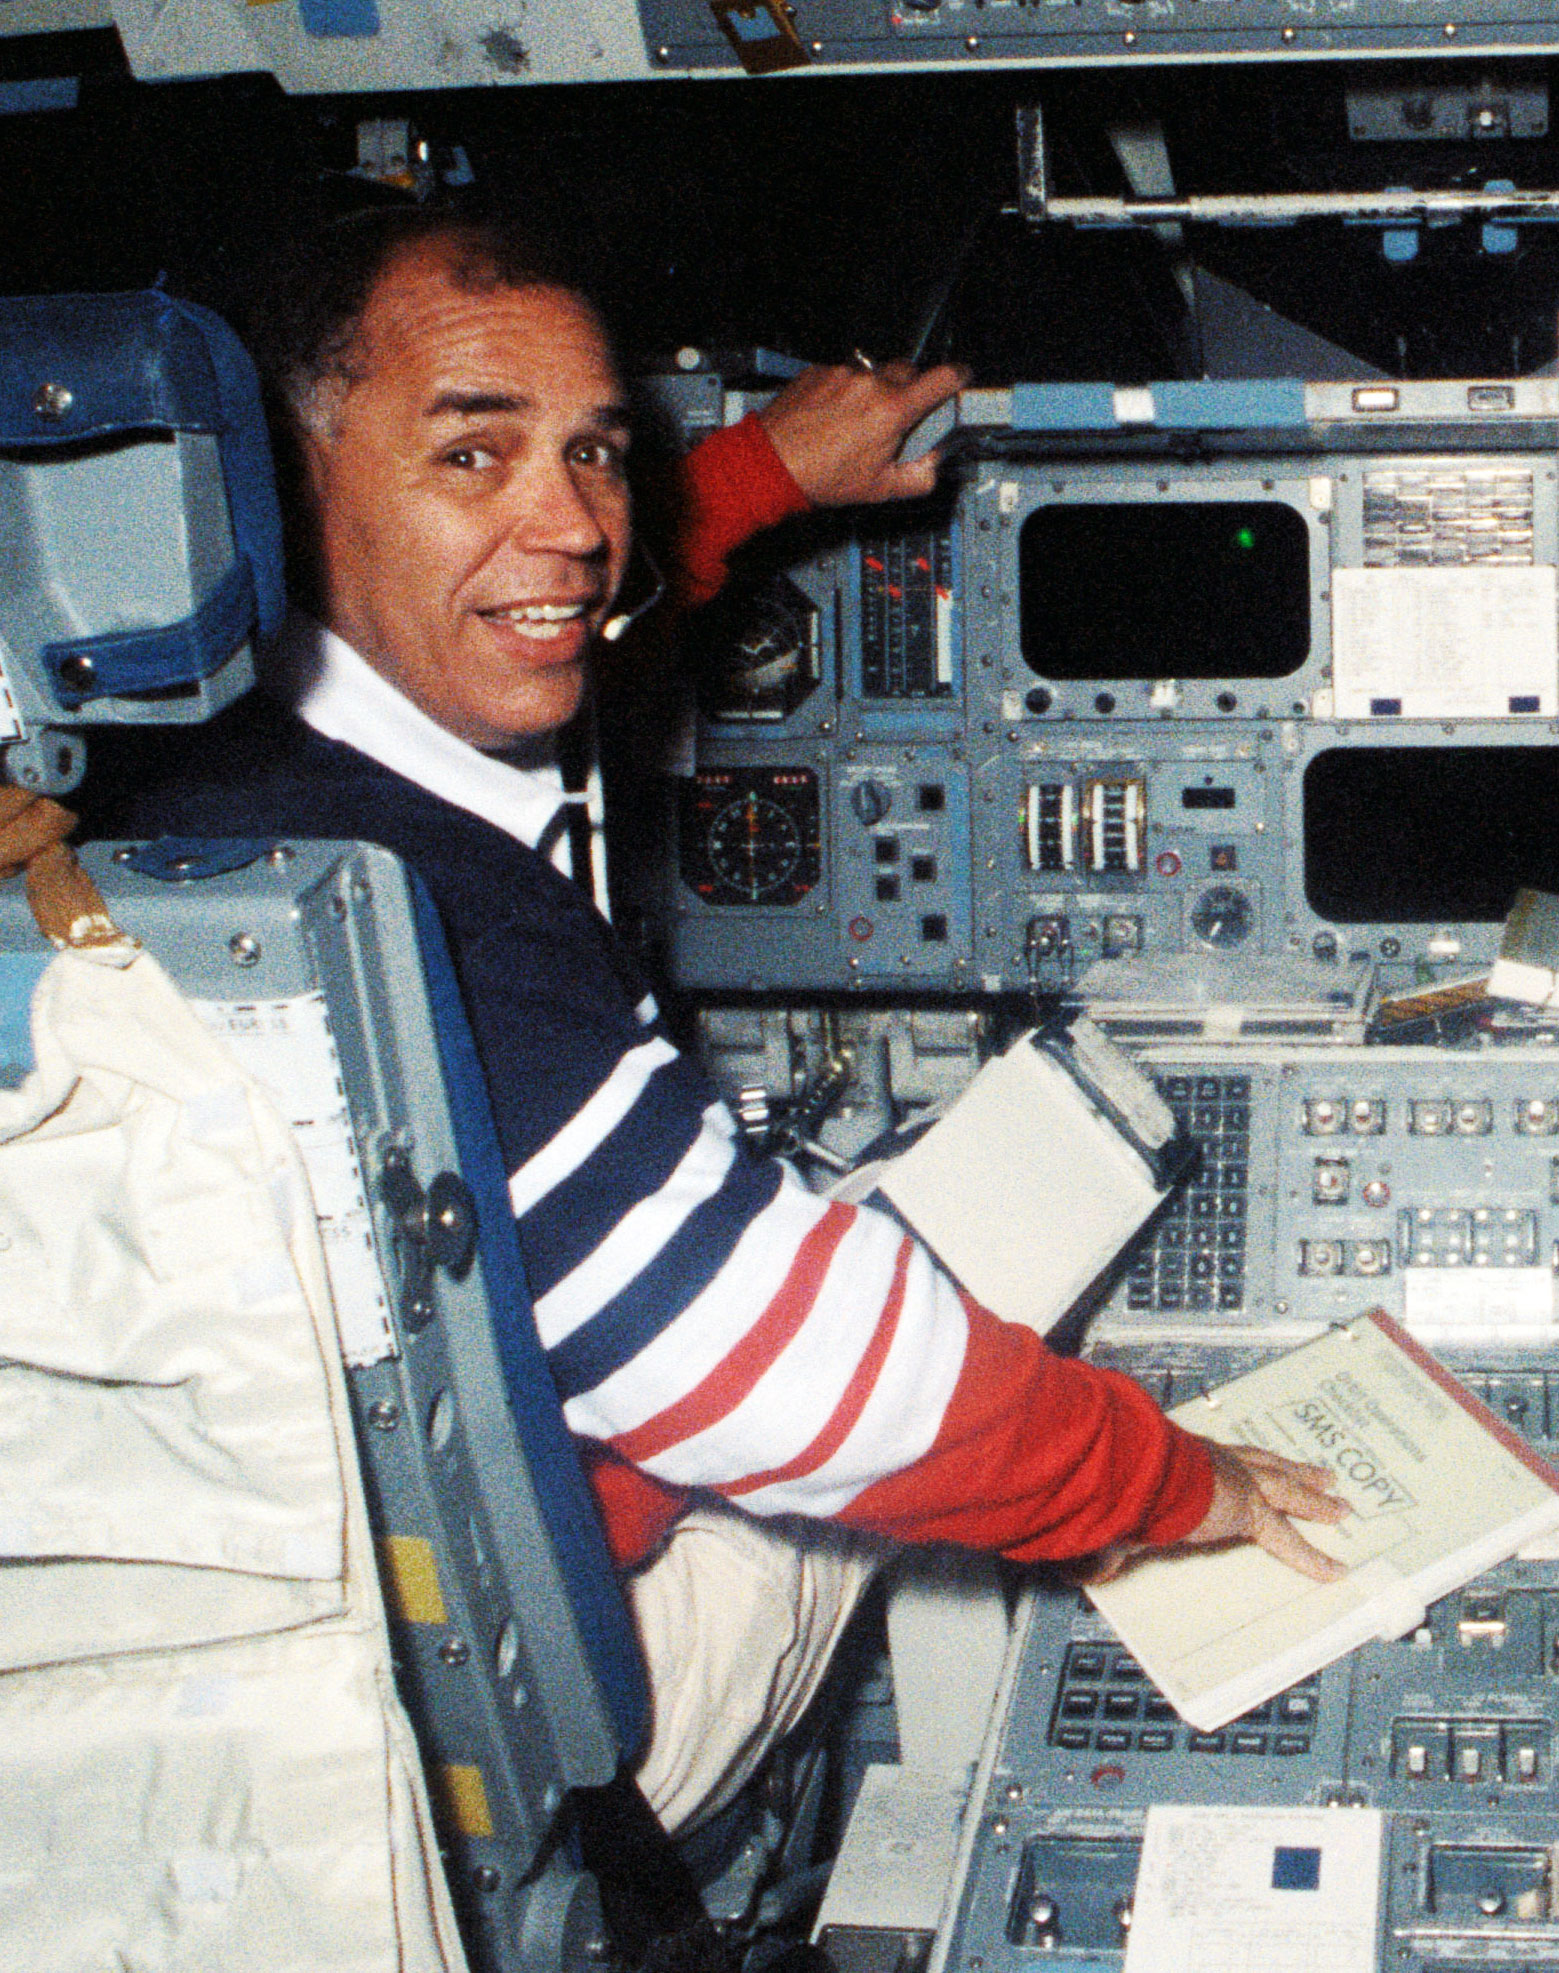 On the flight deck of Atlantis, Fred Gregory is seen at the controls during STS-44 in 1991.